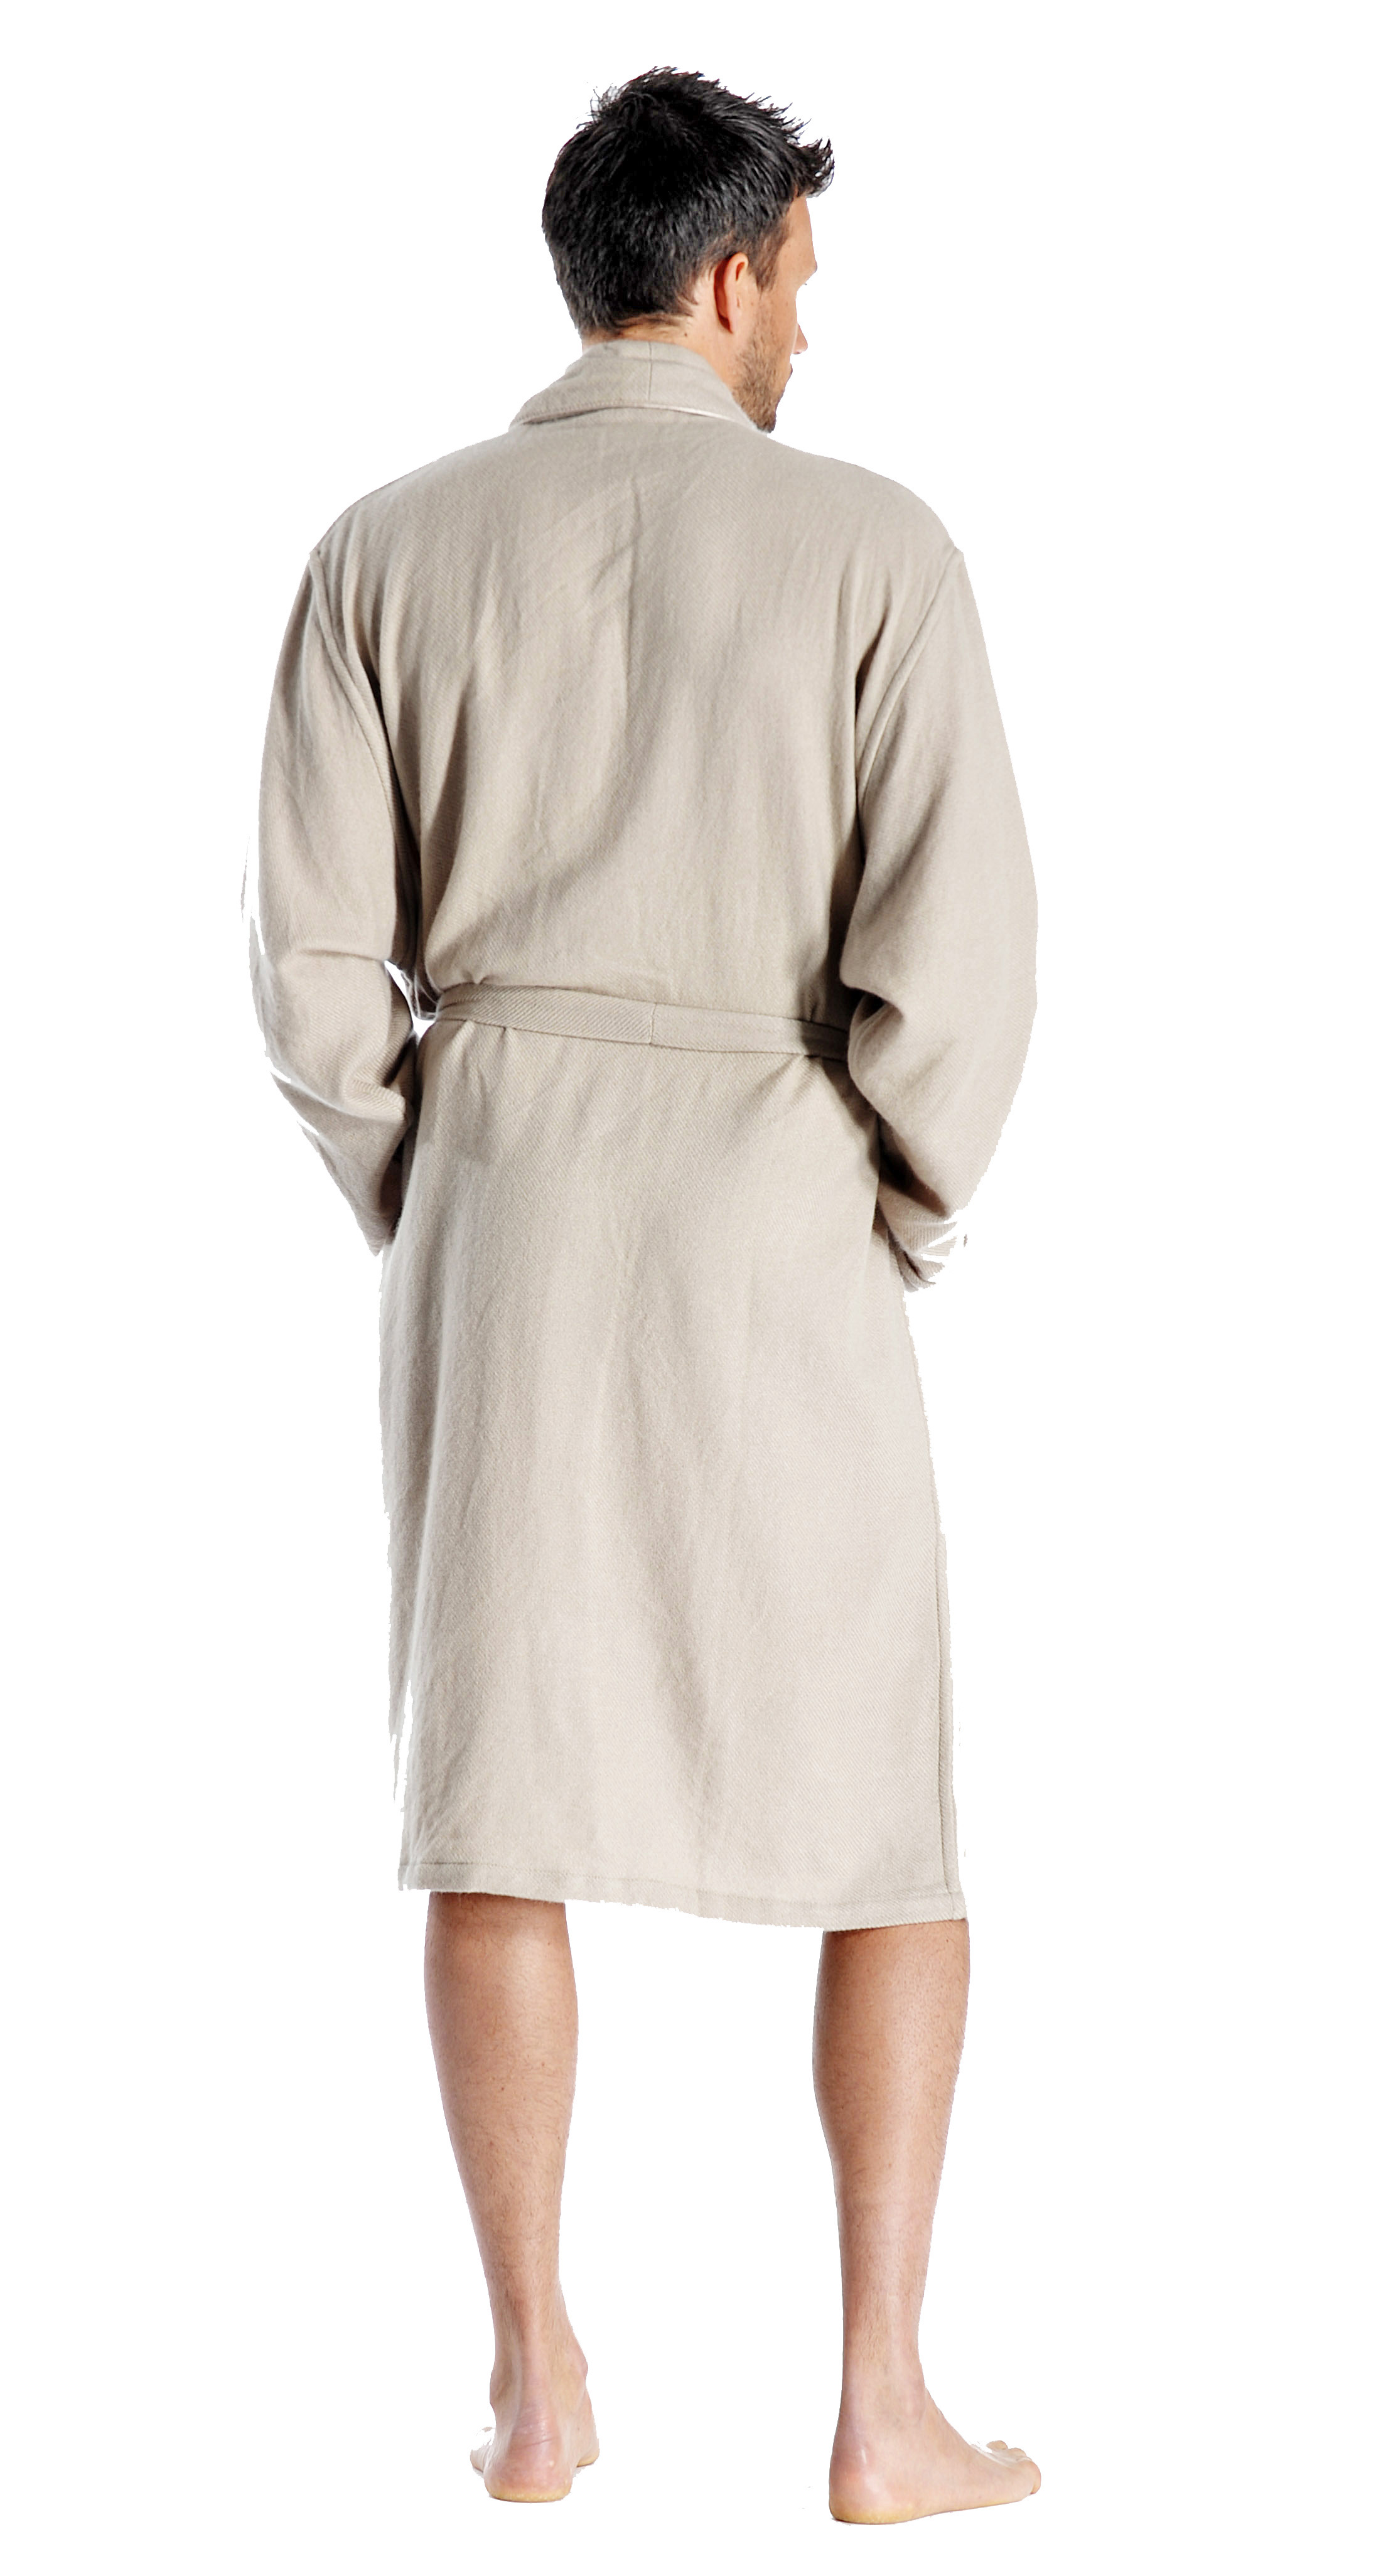 Pure Cashmere Knee Length Robe for Men (Navy, Large/Extra Large)